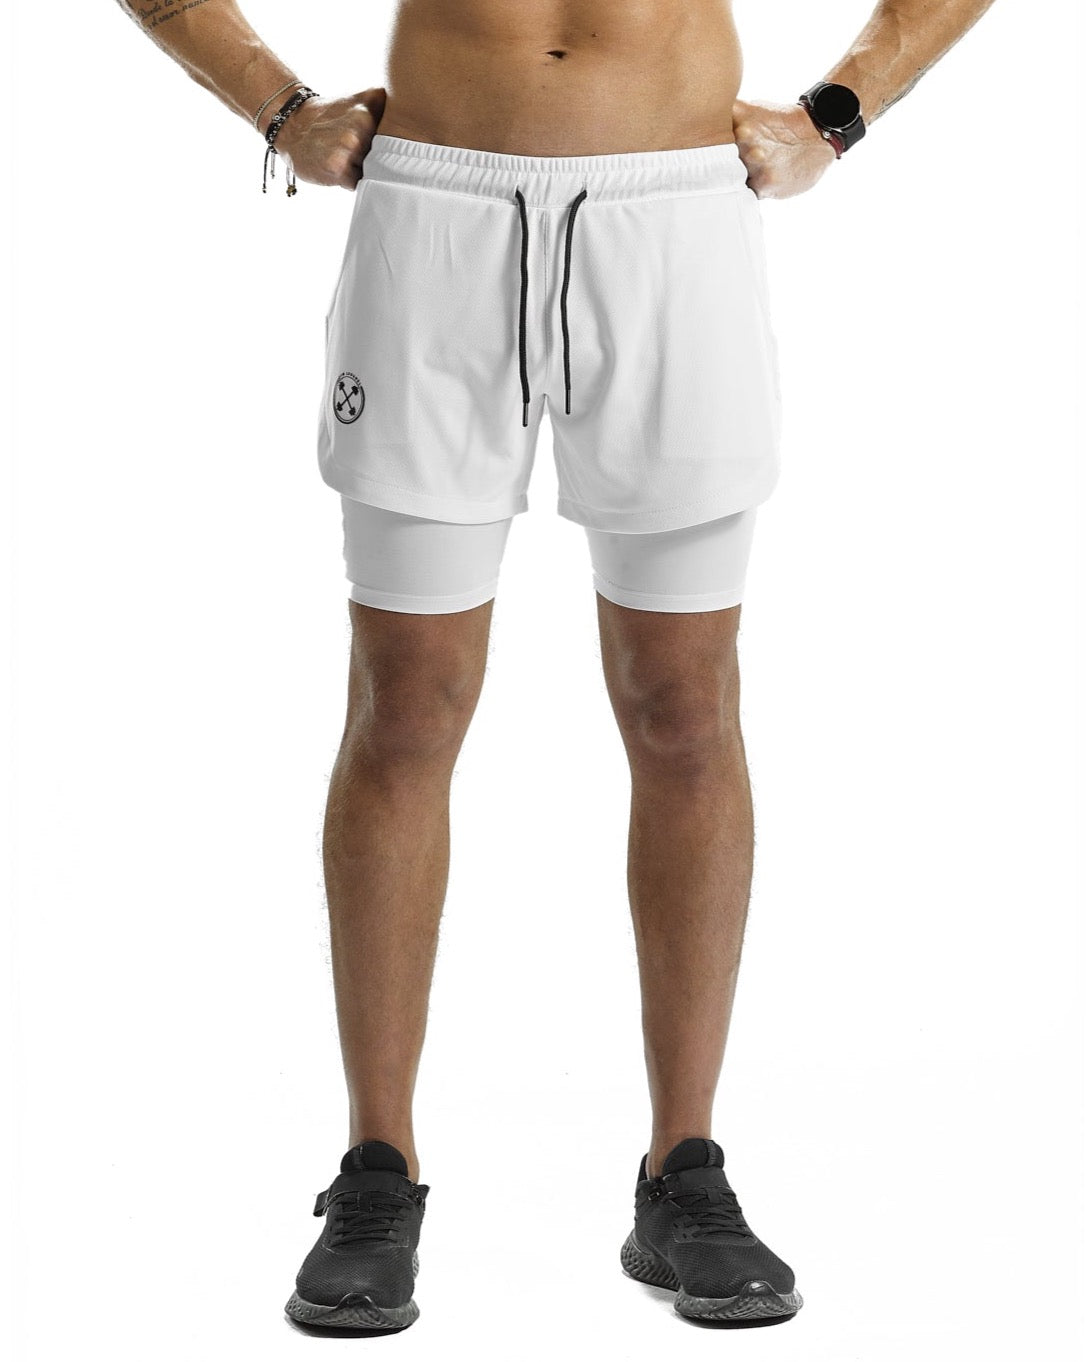 2 in 1 Functional Training Shorts [White] - Shorts - Gym Apparel Egypt